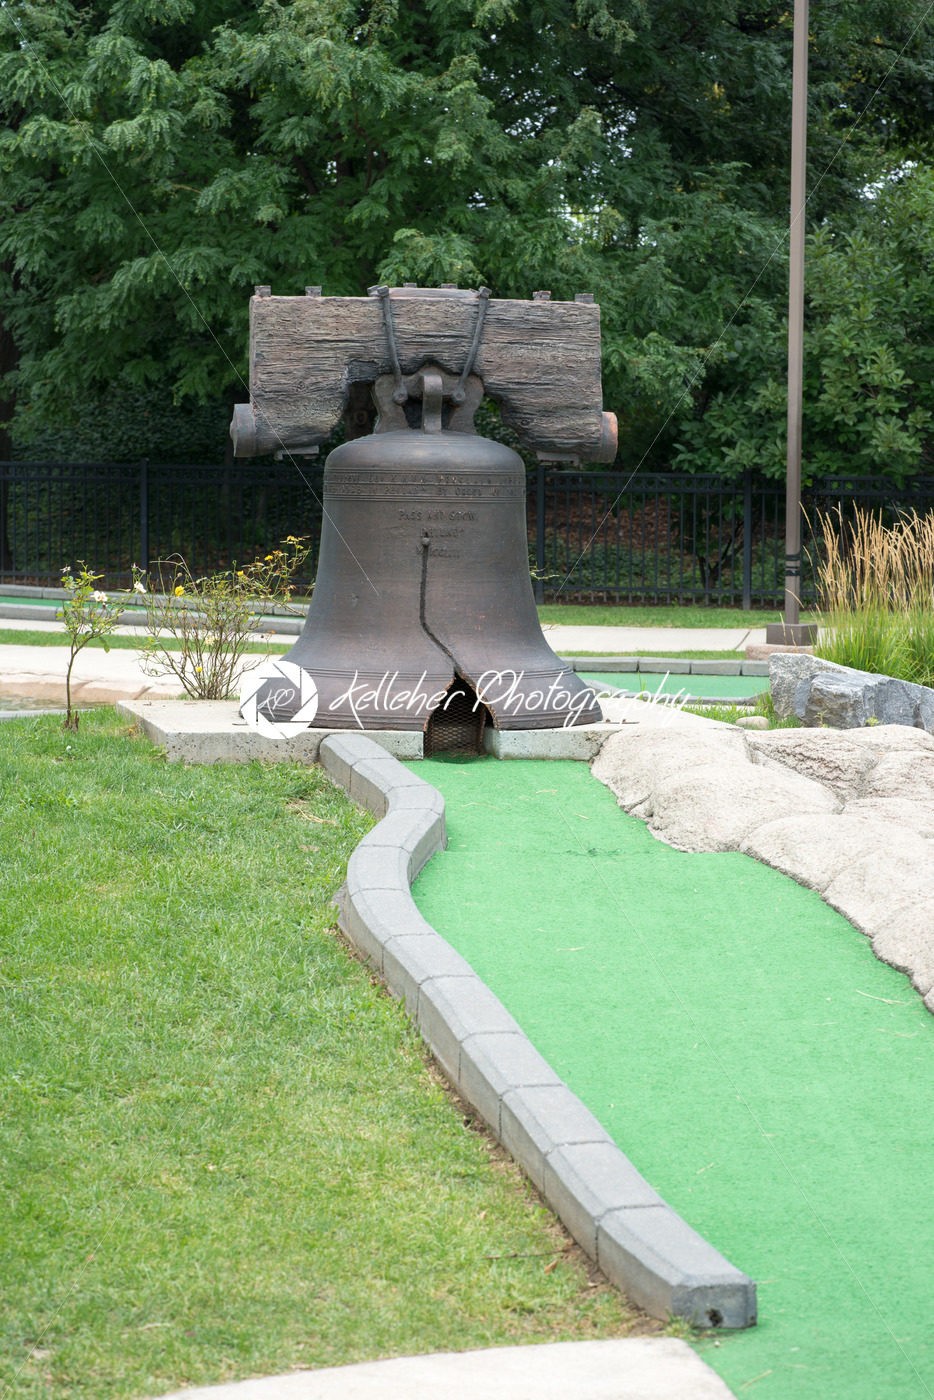 PHILADELPHIA, USA – AUGUST 12: Minature Golf course with Philadelphia themed structures in Franklin Square in Center City Philadelphia on August 12, 2017 - Kelleher Photography Store